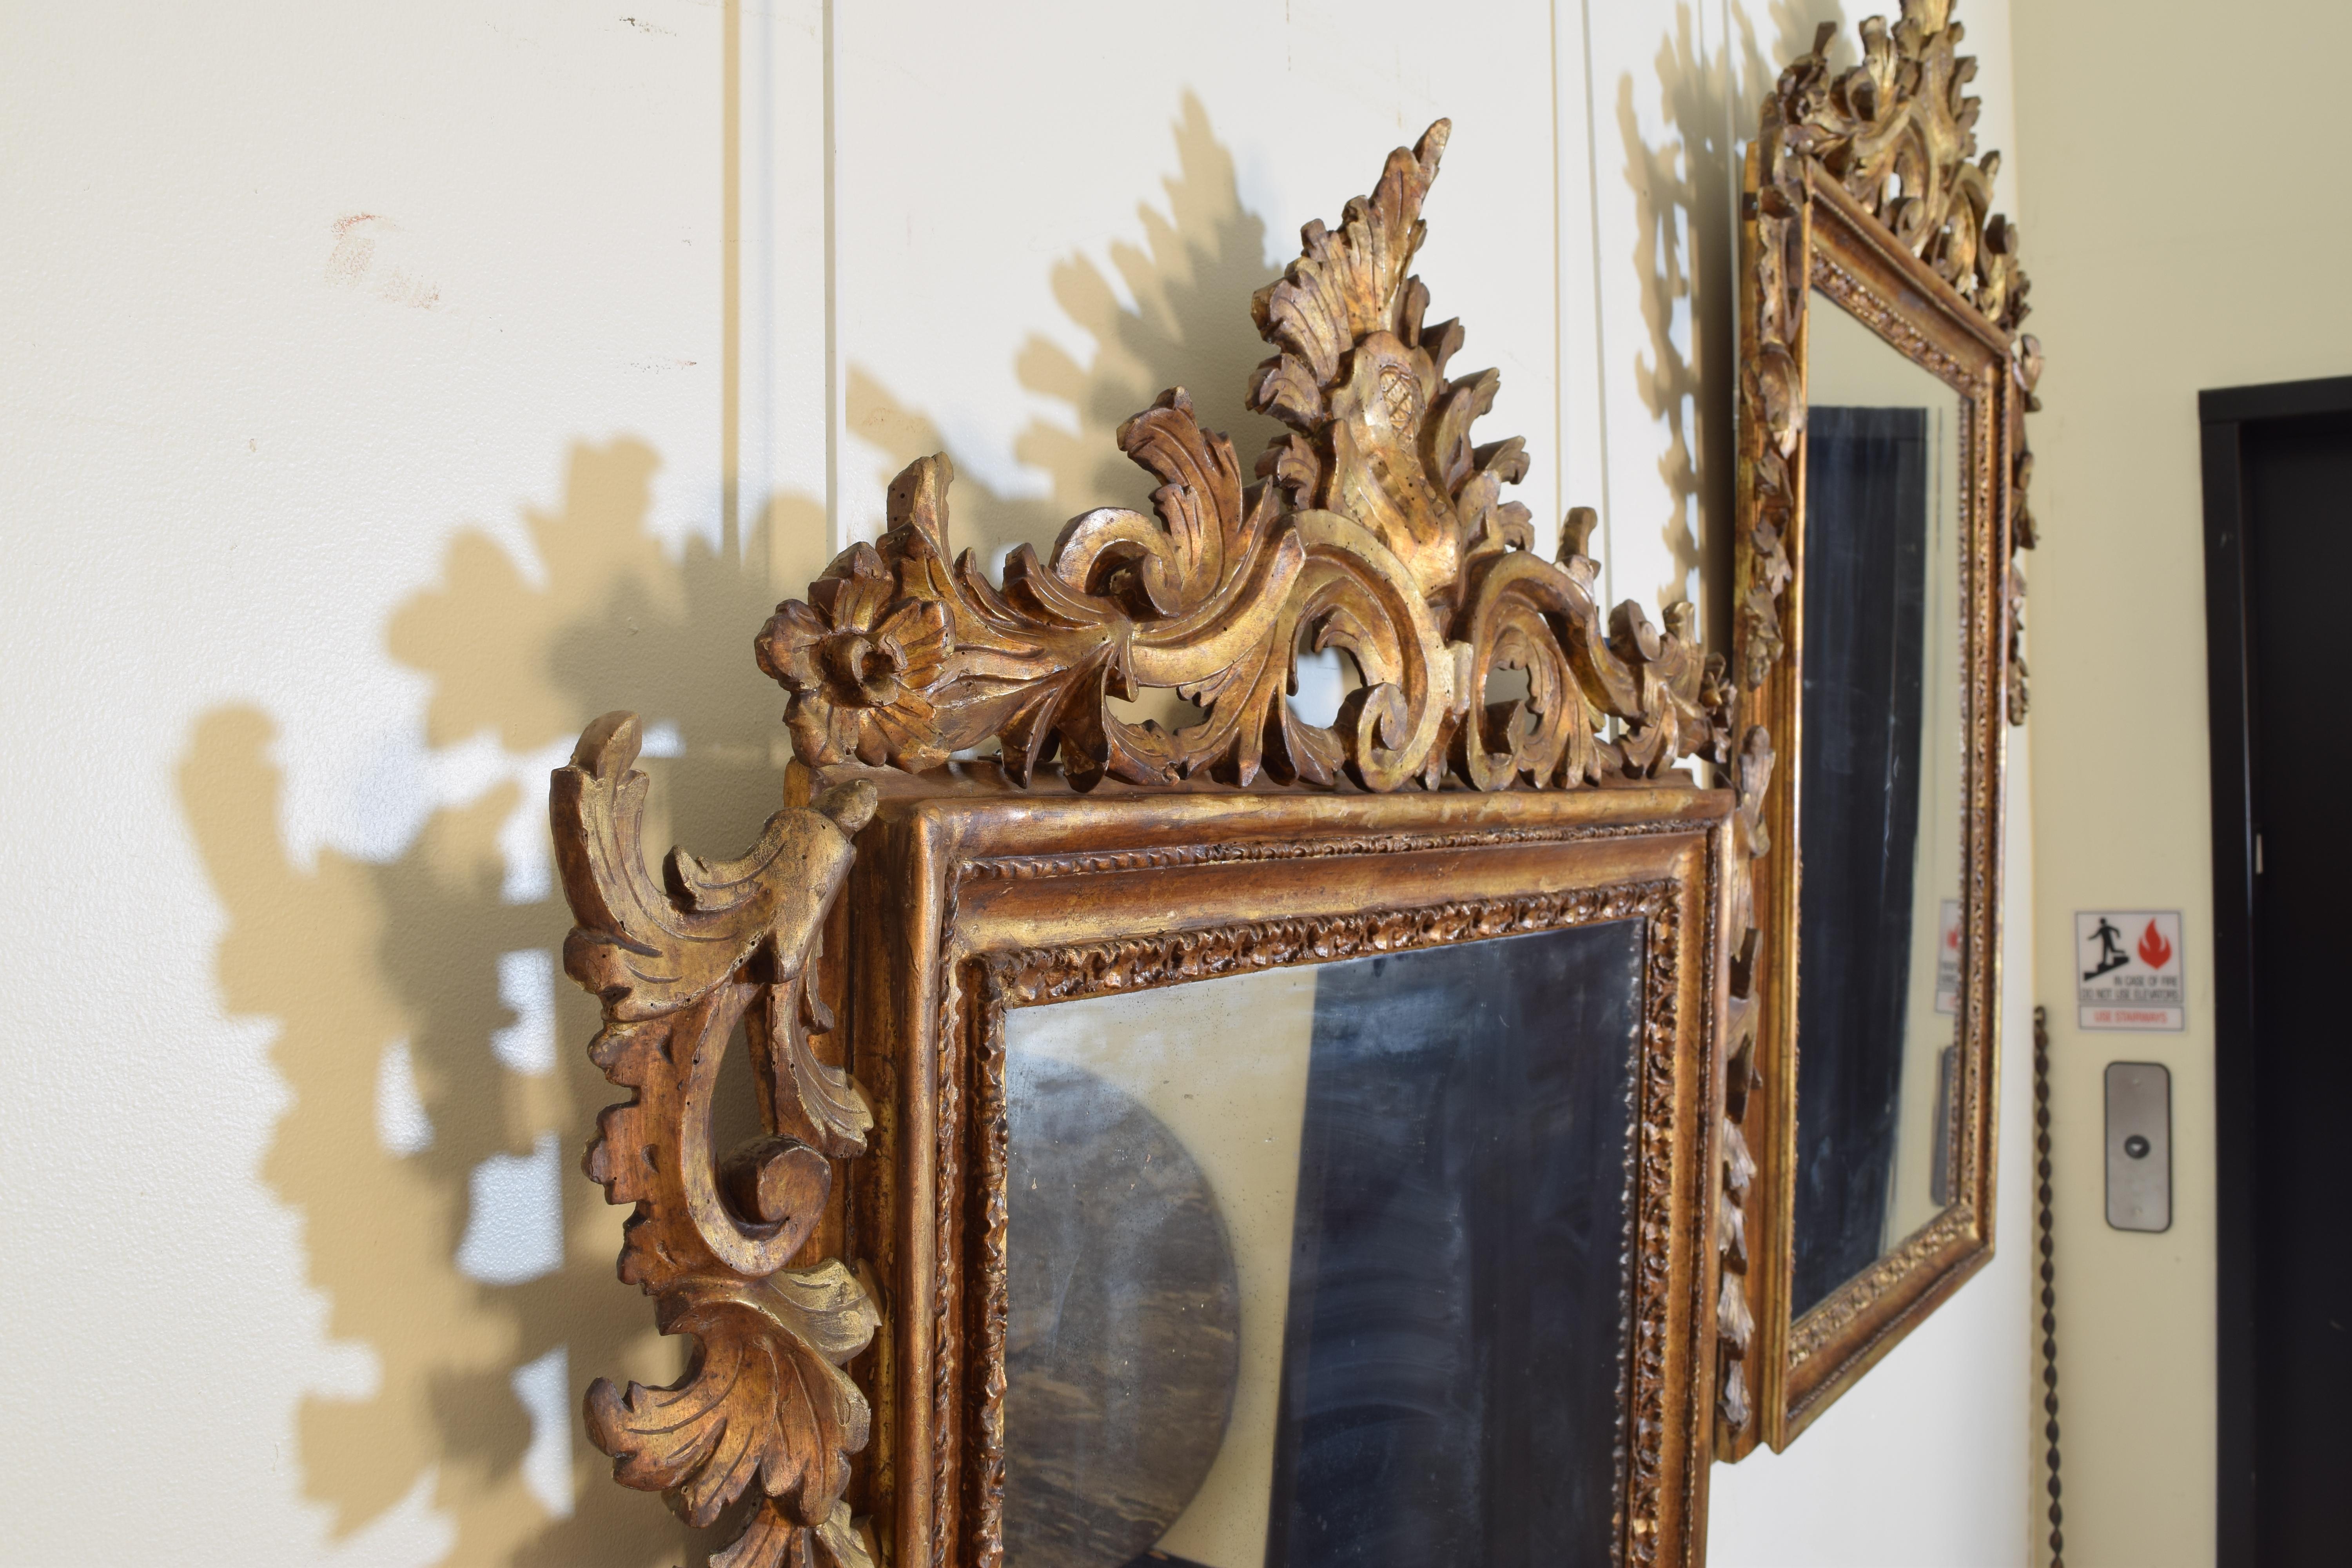 Pair of Carved Mecca Mirrors, Louis XIV Period Naples, Italy, Early 18th Century 1